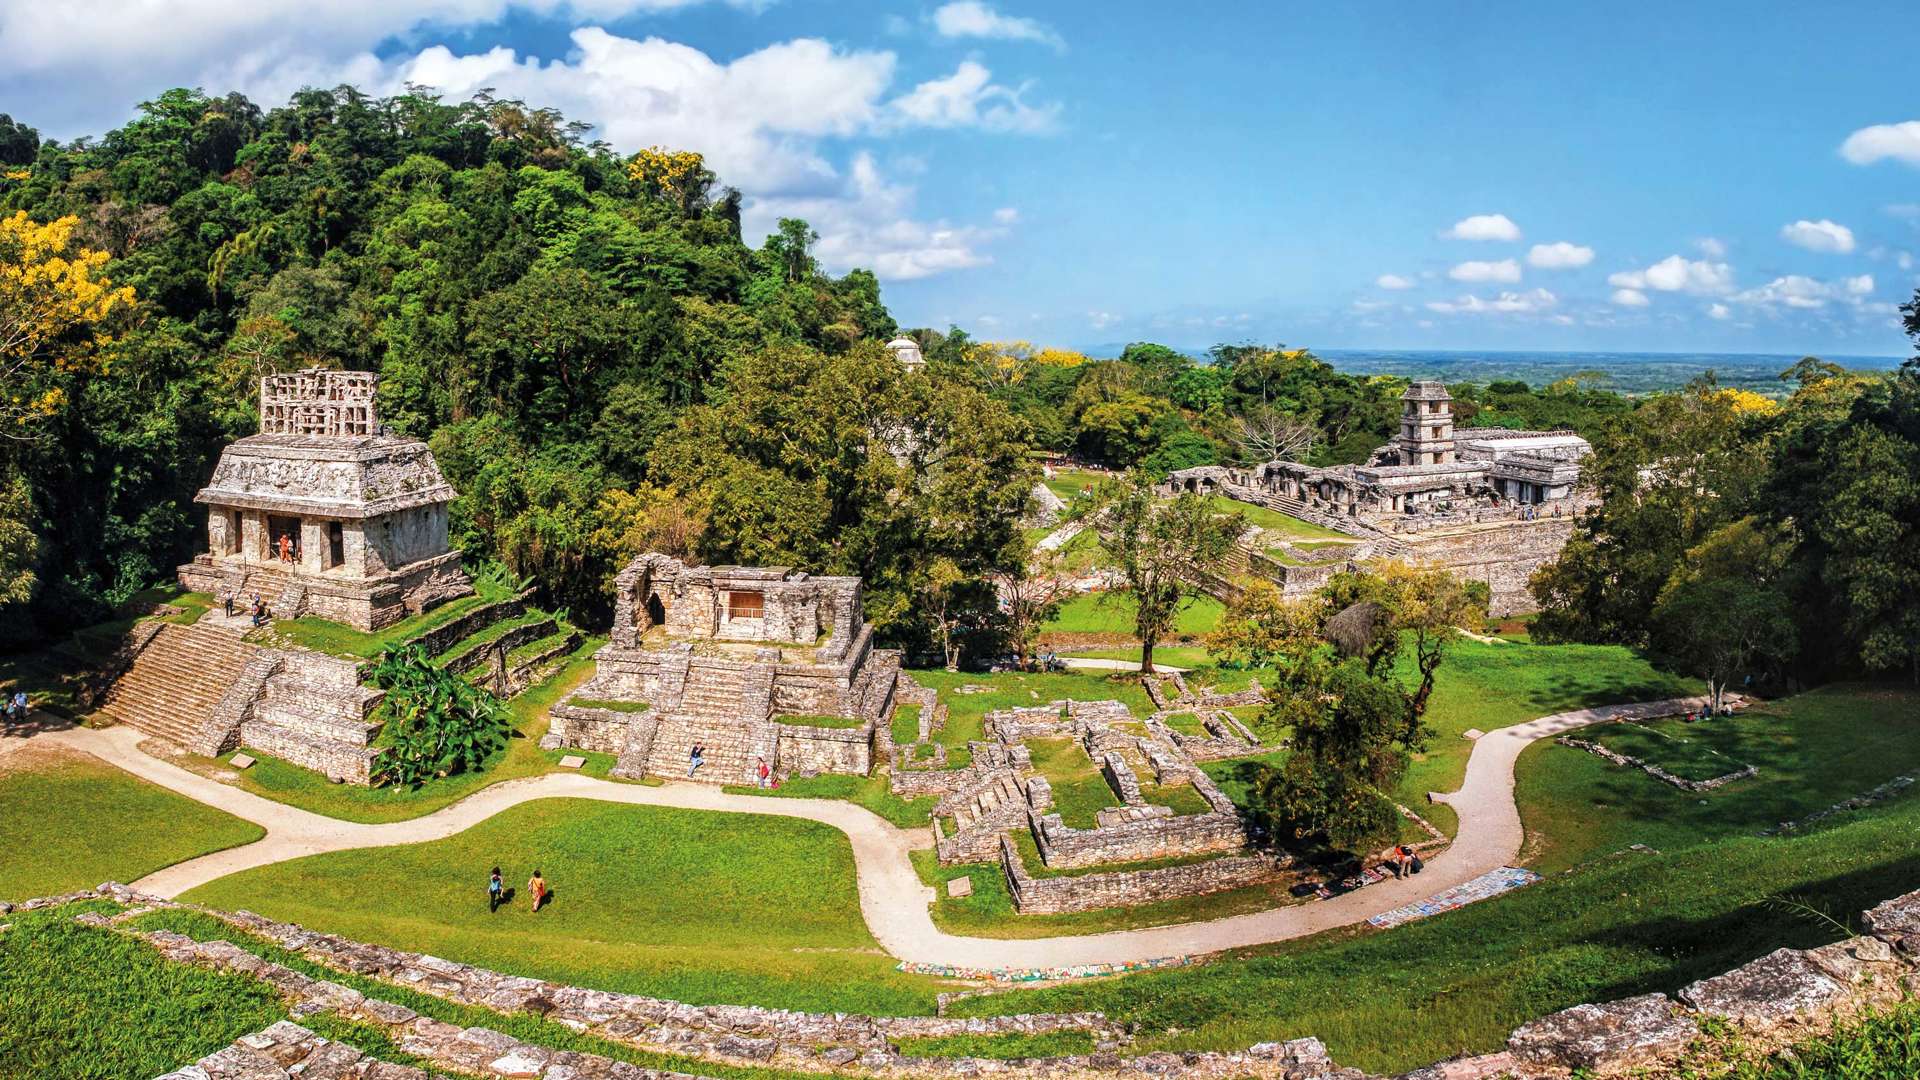 Unravelling the mysteries of the Mayans